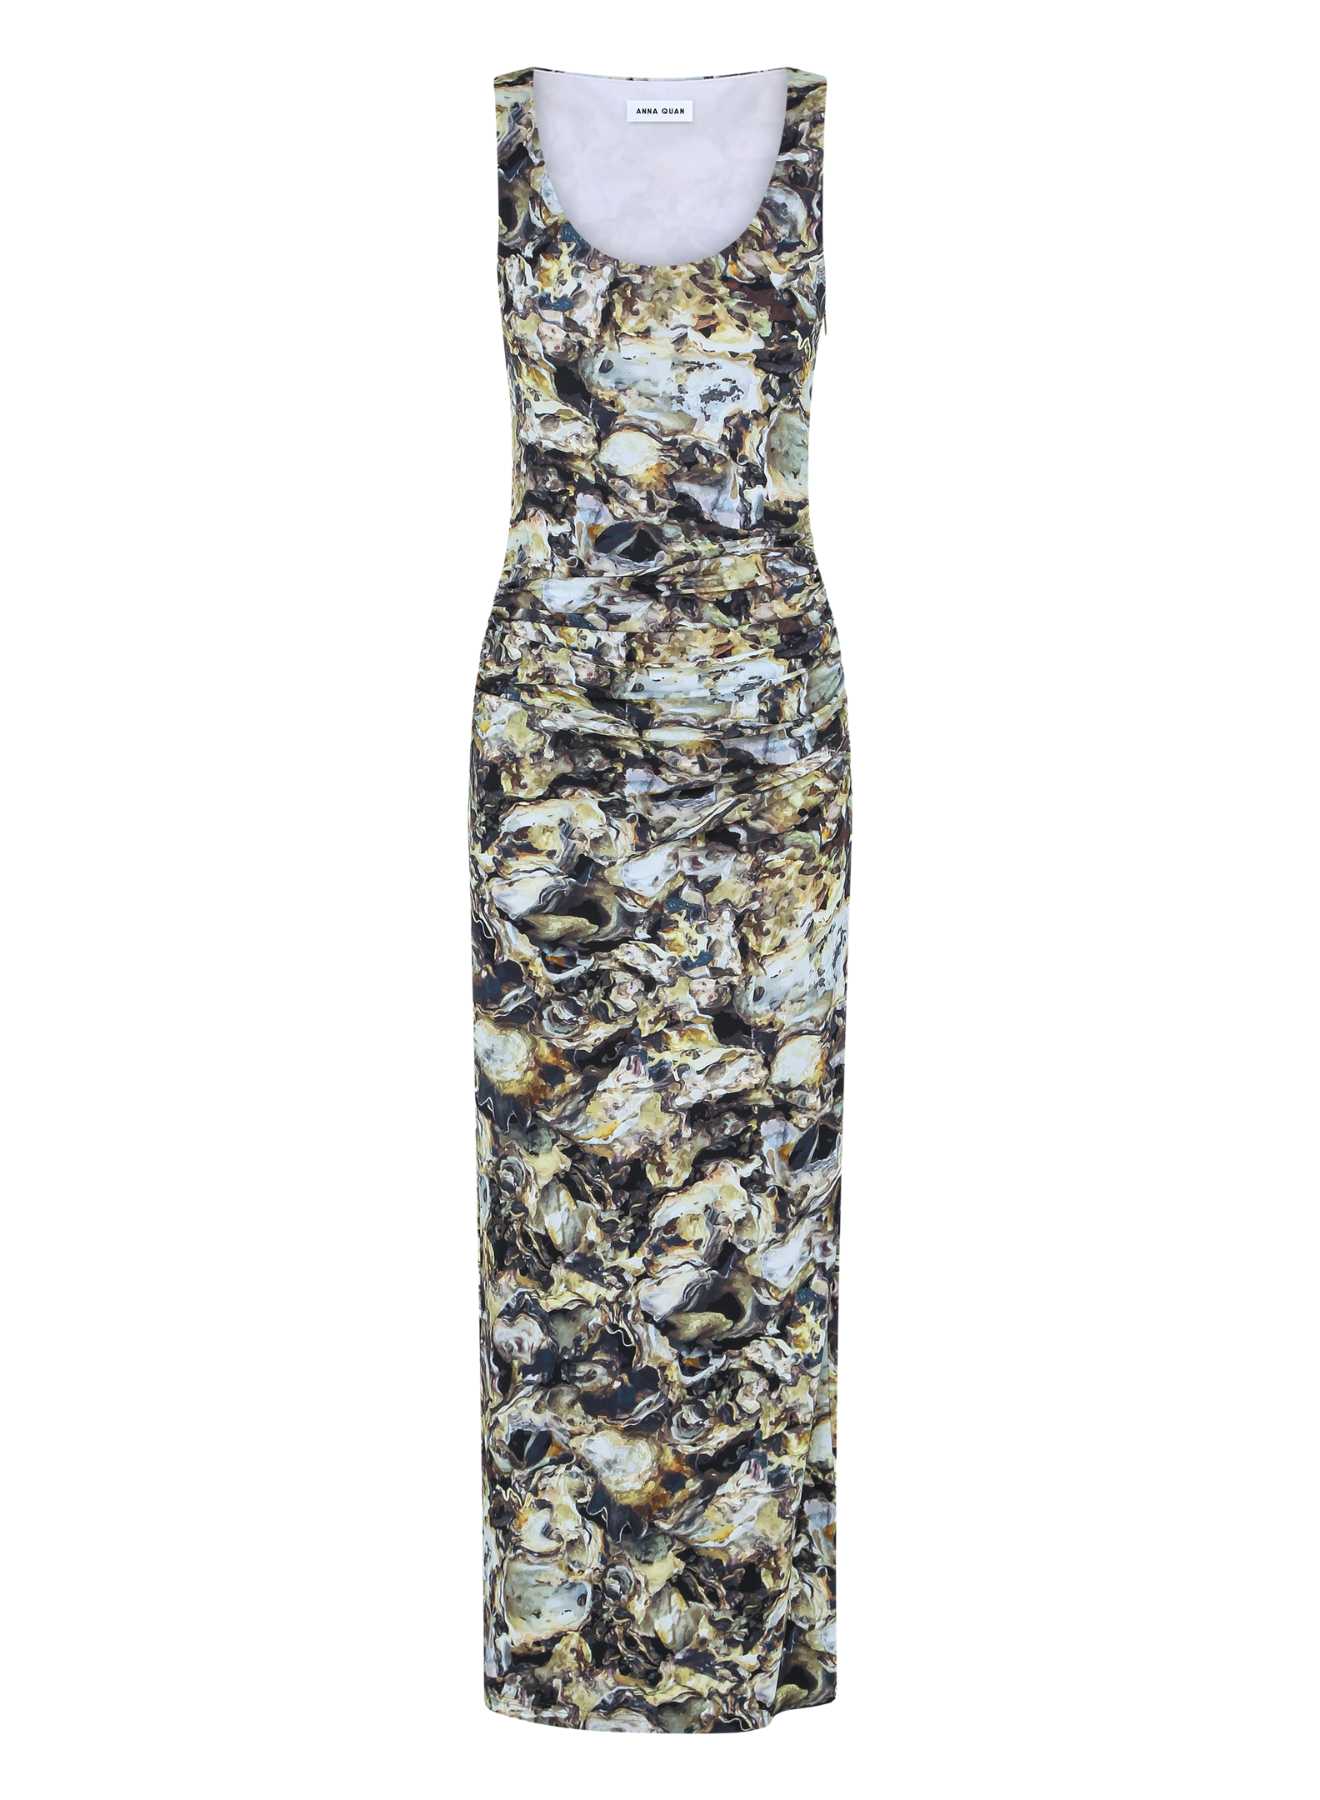 ANNA QUAN Shelley Dress in oyster viscose jersey print. Midi column silhouette, soft ruching at waist, center back zip closure, and split. Ideal for a versatile day-to-night look.